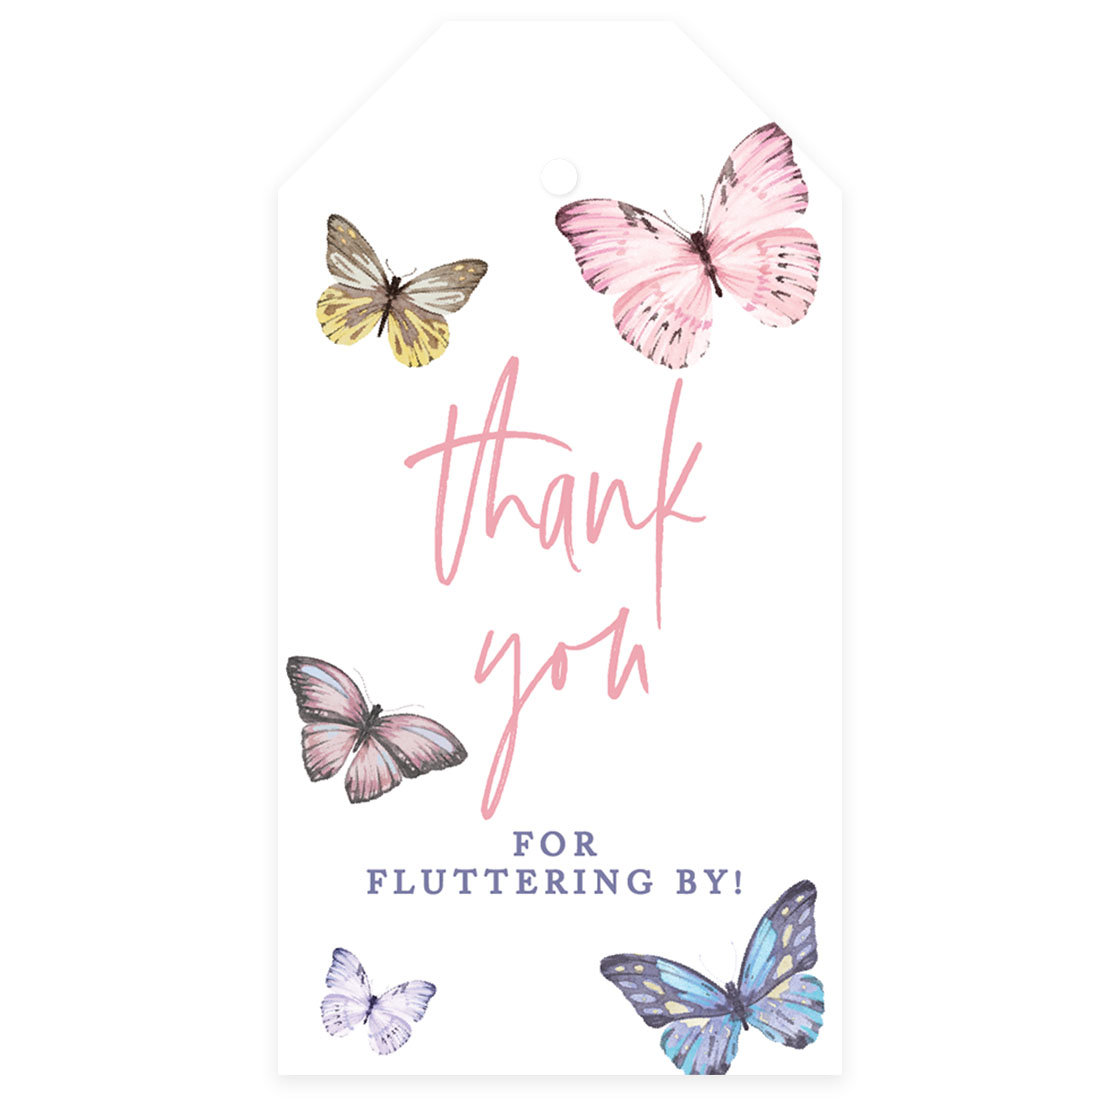 Koyal Wholesale Kids Party Favor Thank You Stickers, 80-Pk 2-Inch Round Butterfly Birthday Stickers for Party Favors, White